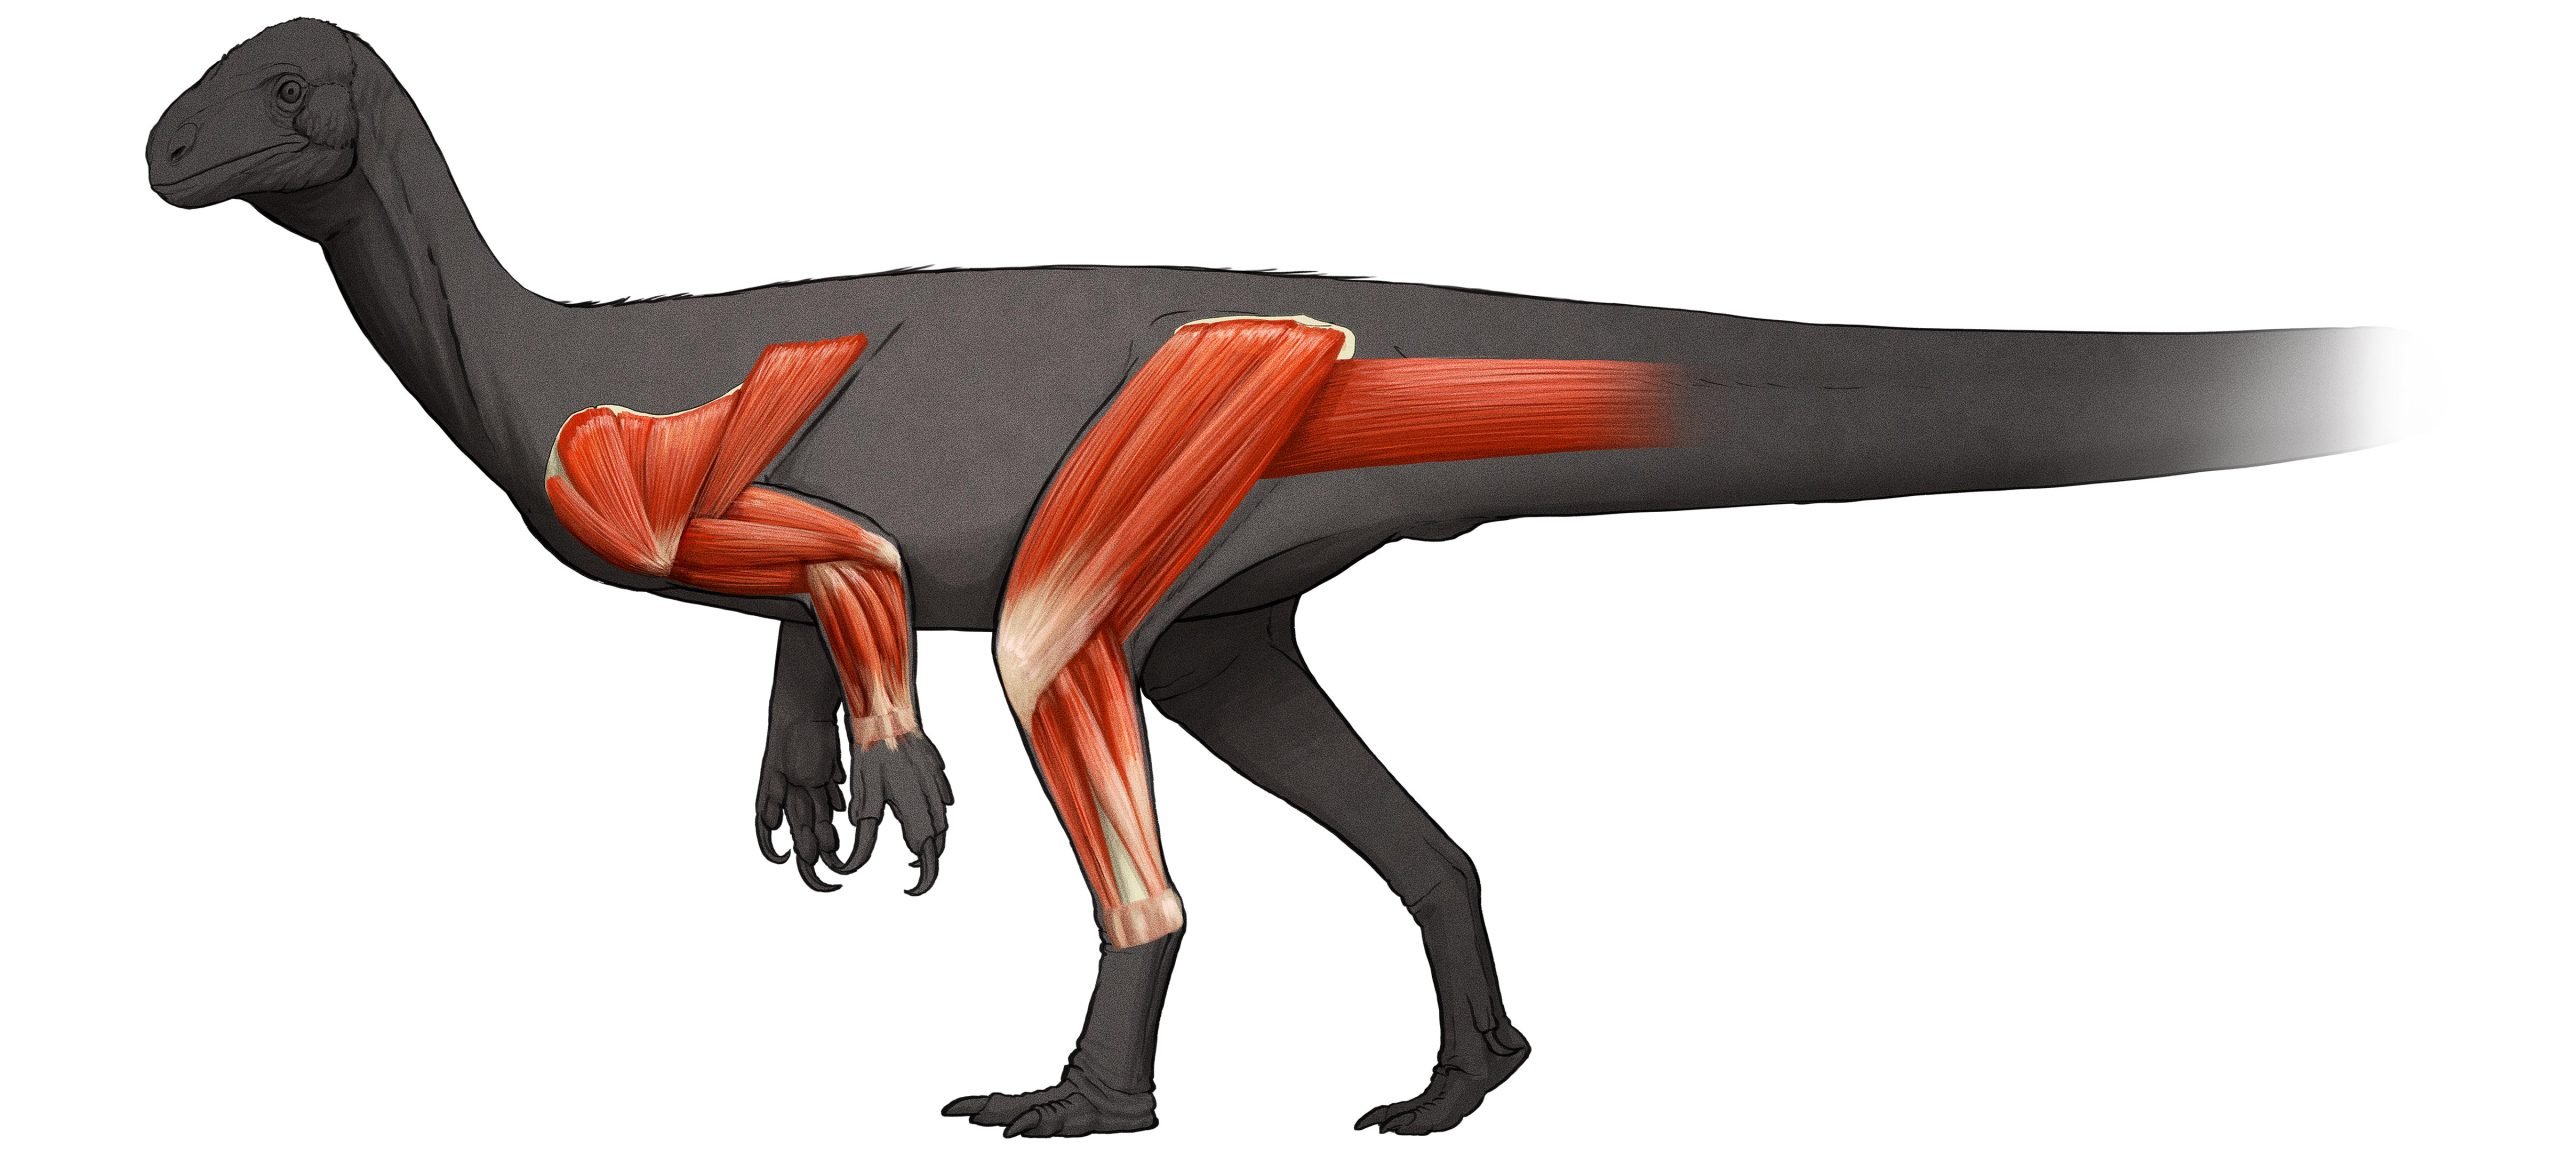 Muscular Study Reveals How Giant 50-Ton Sauropod Dinosaurs Moved and Evolved - SciTechDaily